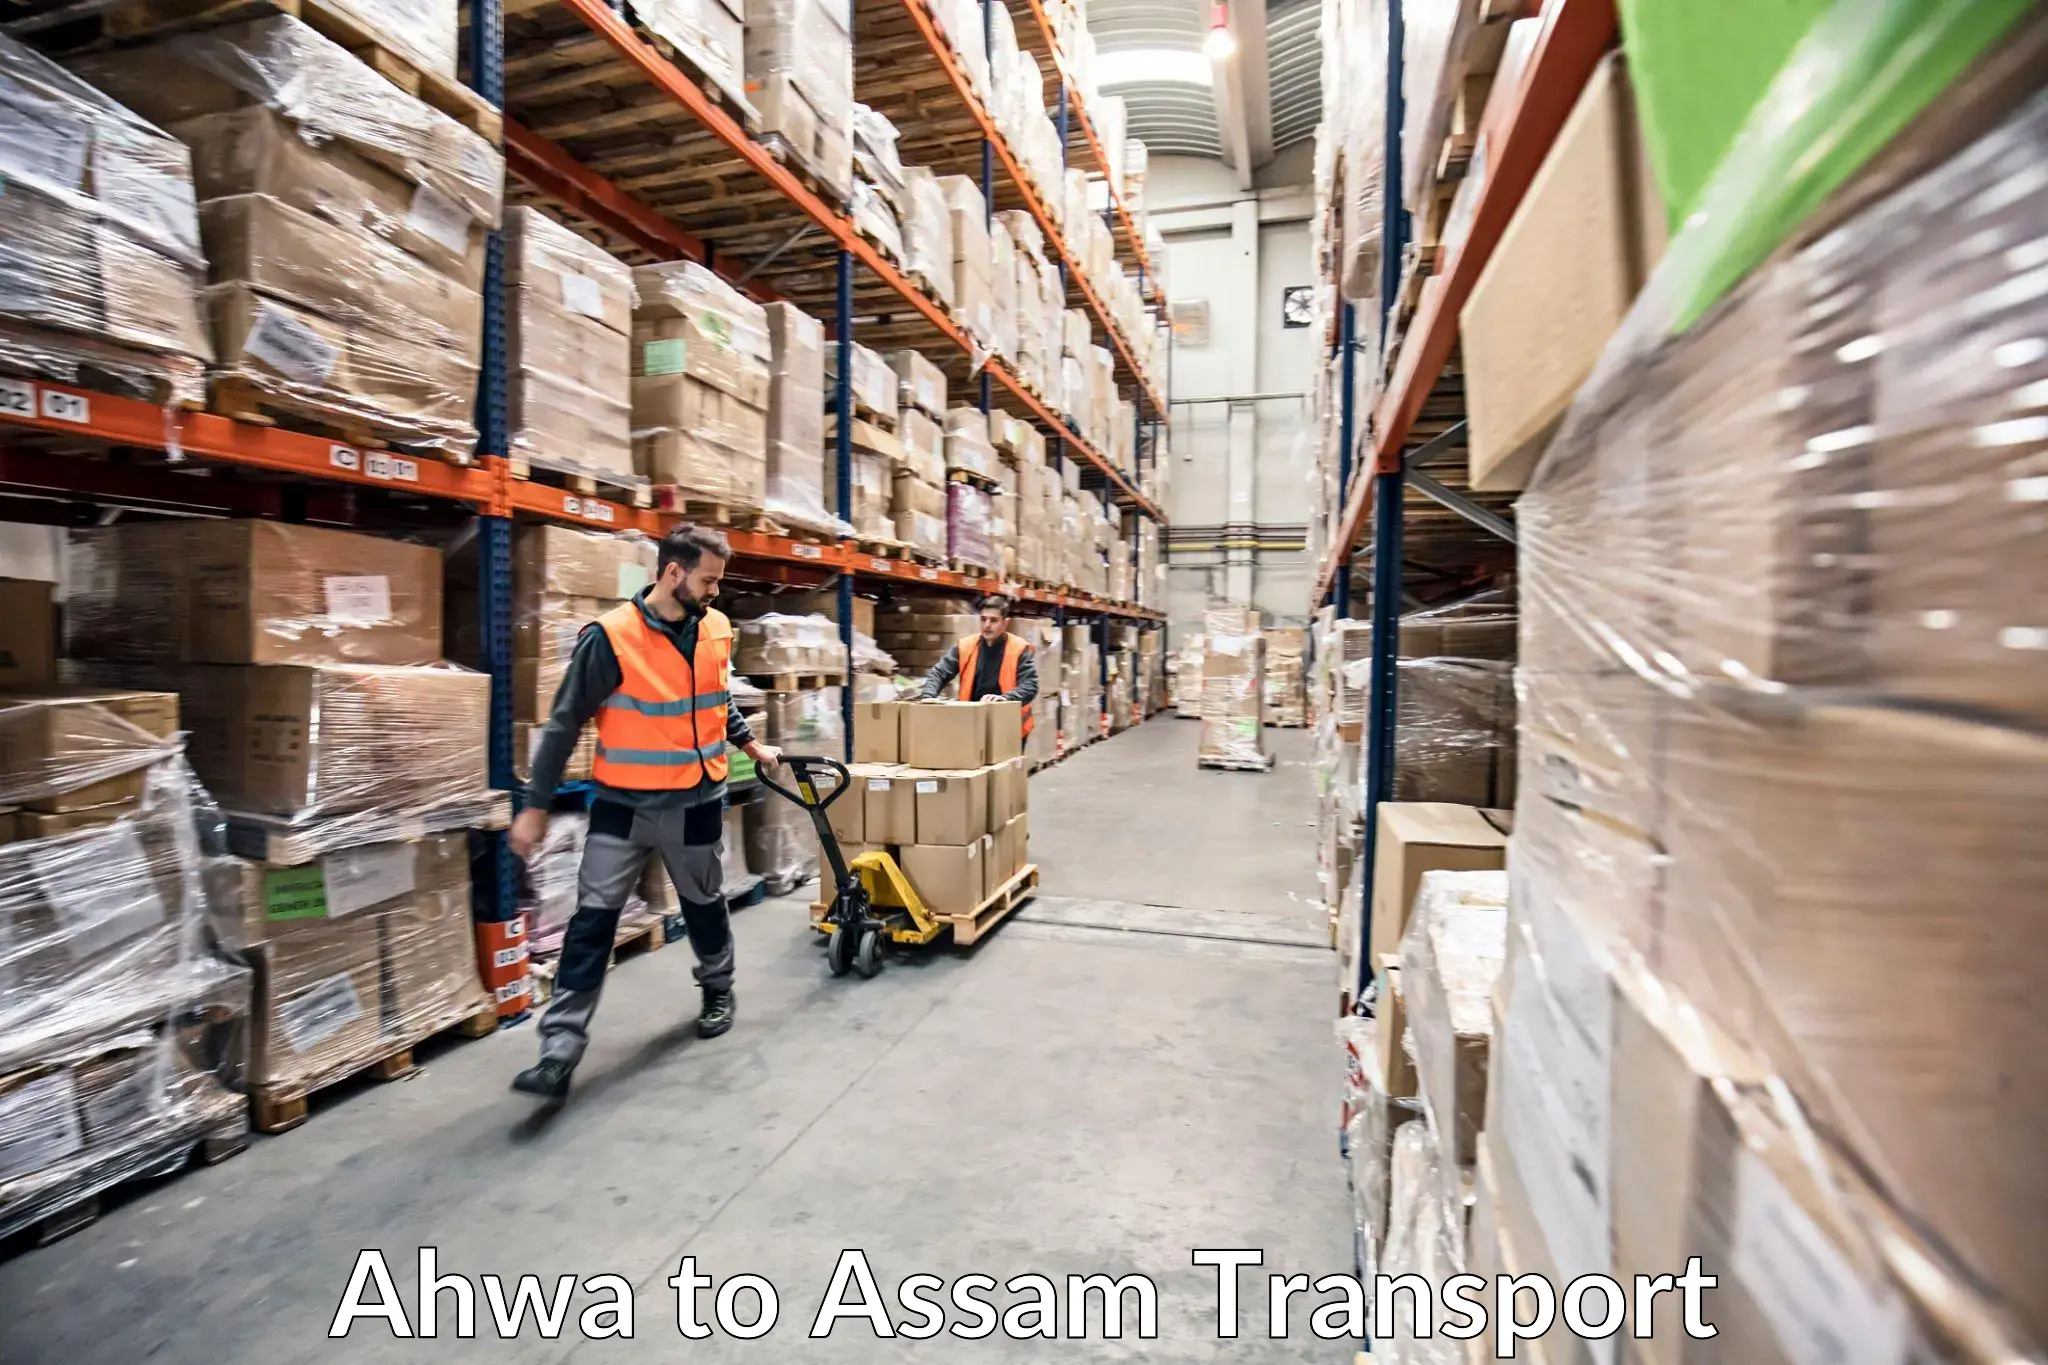 Vehicle transport services in Ahwa to Lala Assam